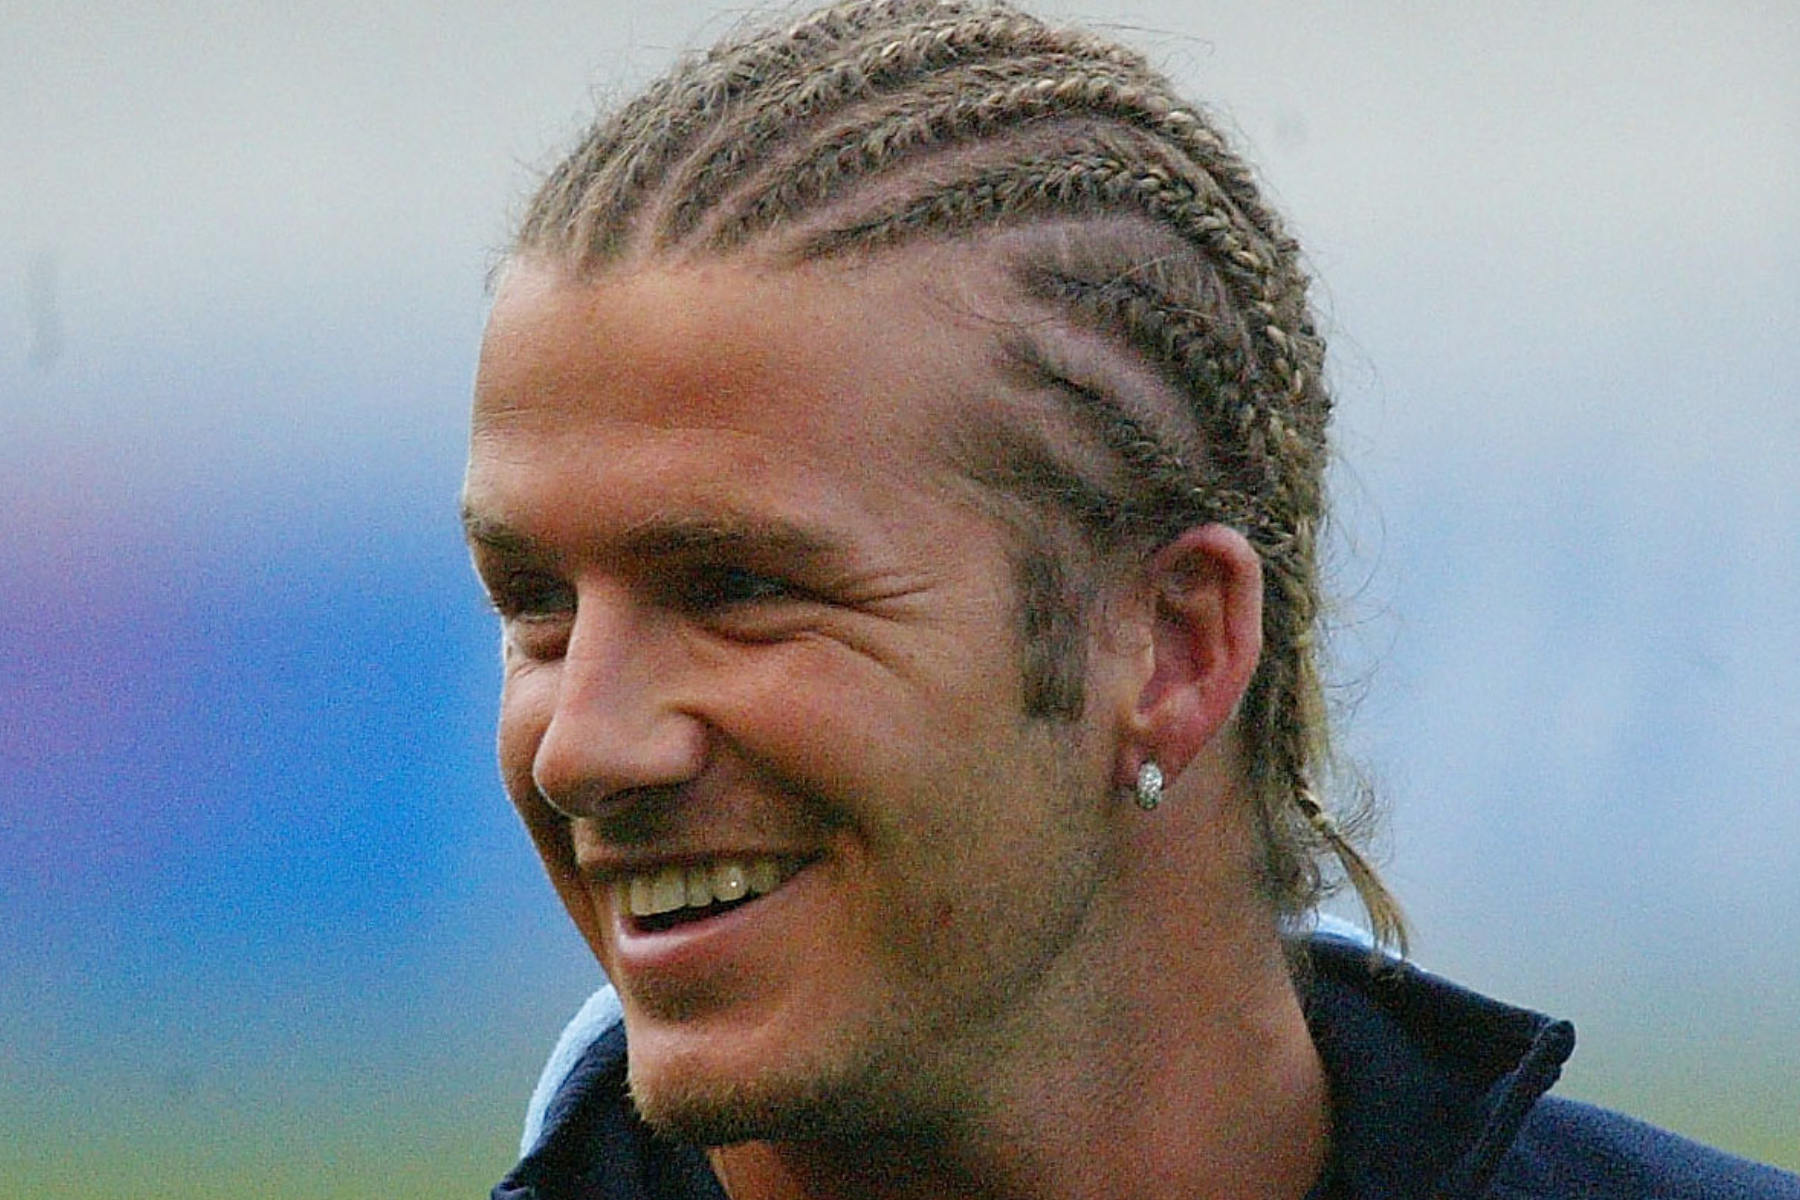 An exhaustive list of David Beckham's hairstyles from over the years.